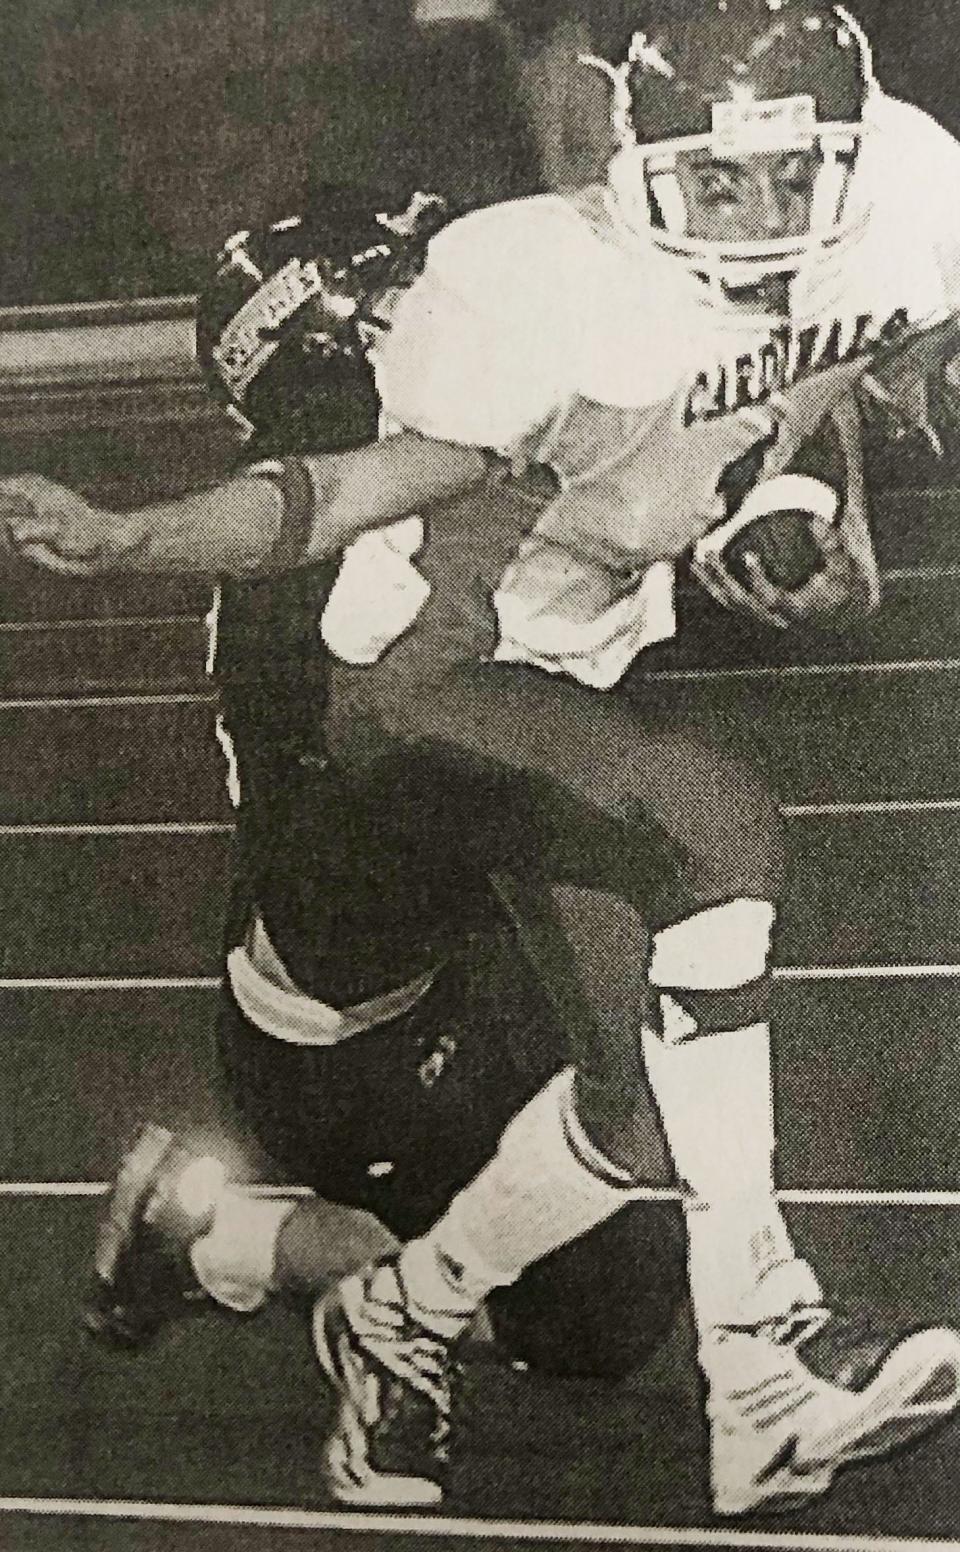 Arlington's Bumper Pickner attempts to break free from Stickney-Mount Vernon's Bo Hoffman during the 2005 state Class 9AA football championship in the DakotaDome. Arlington repeated as the state 9AA champions with a 39-14 win.